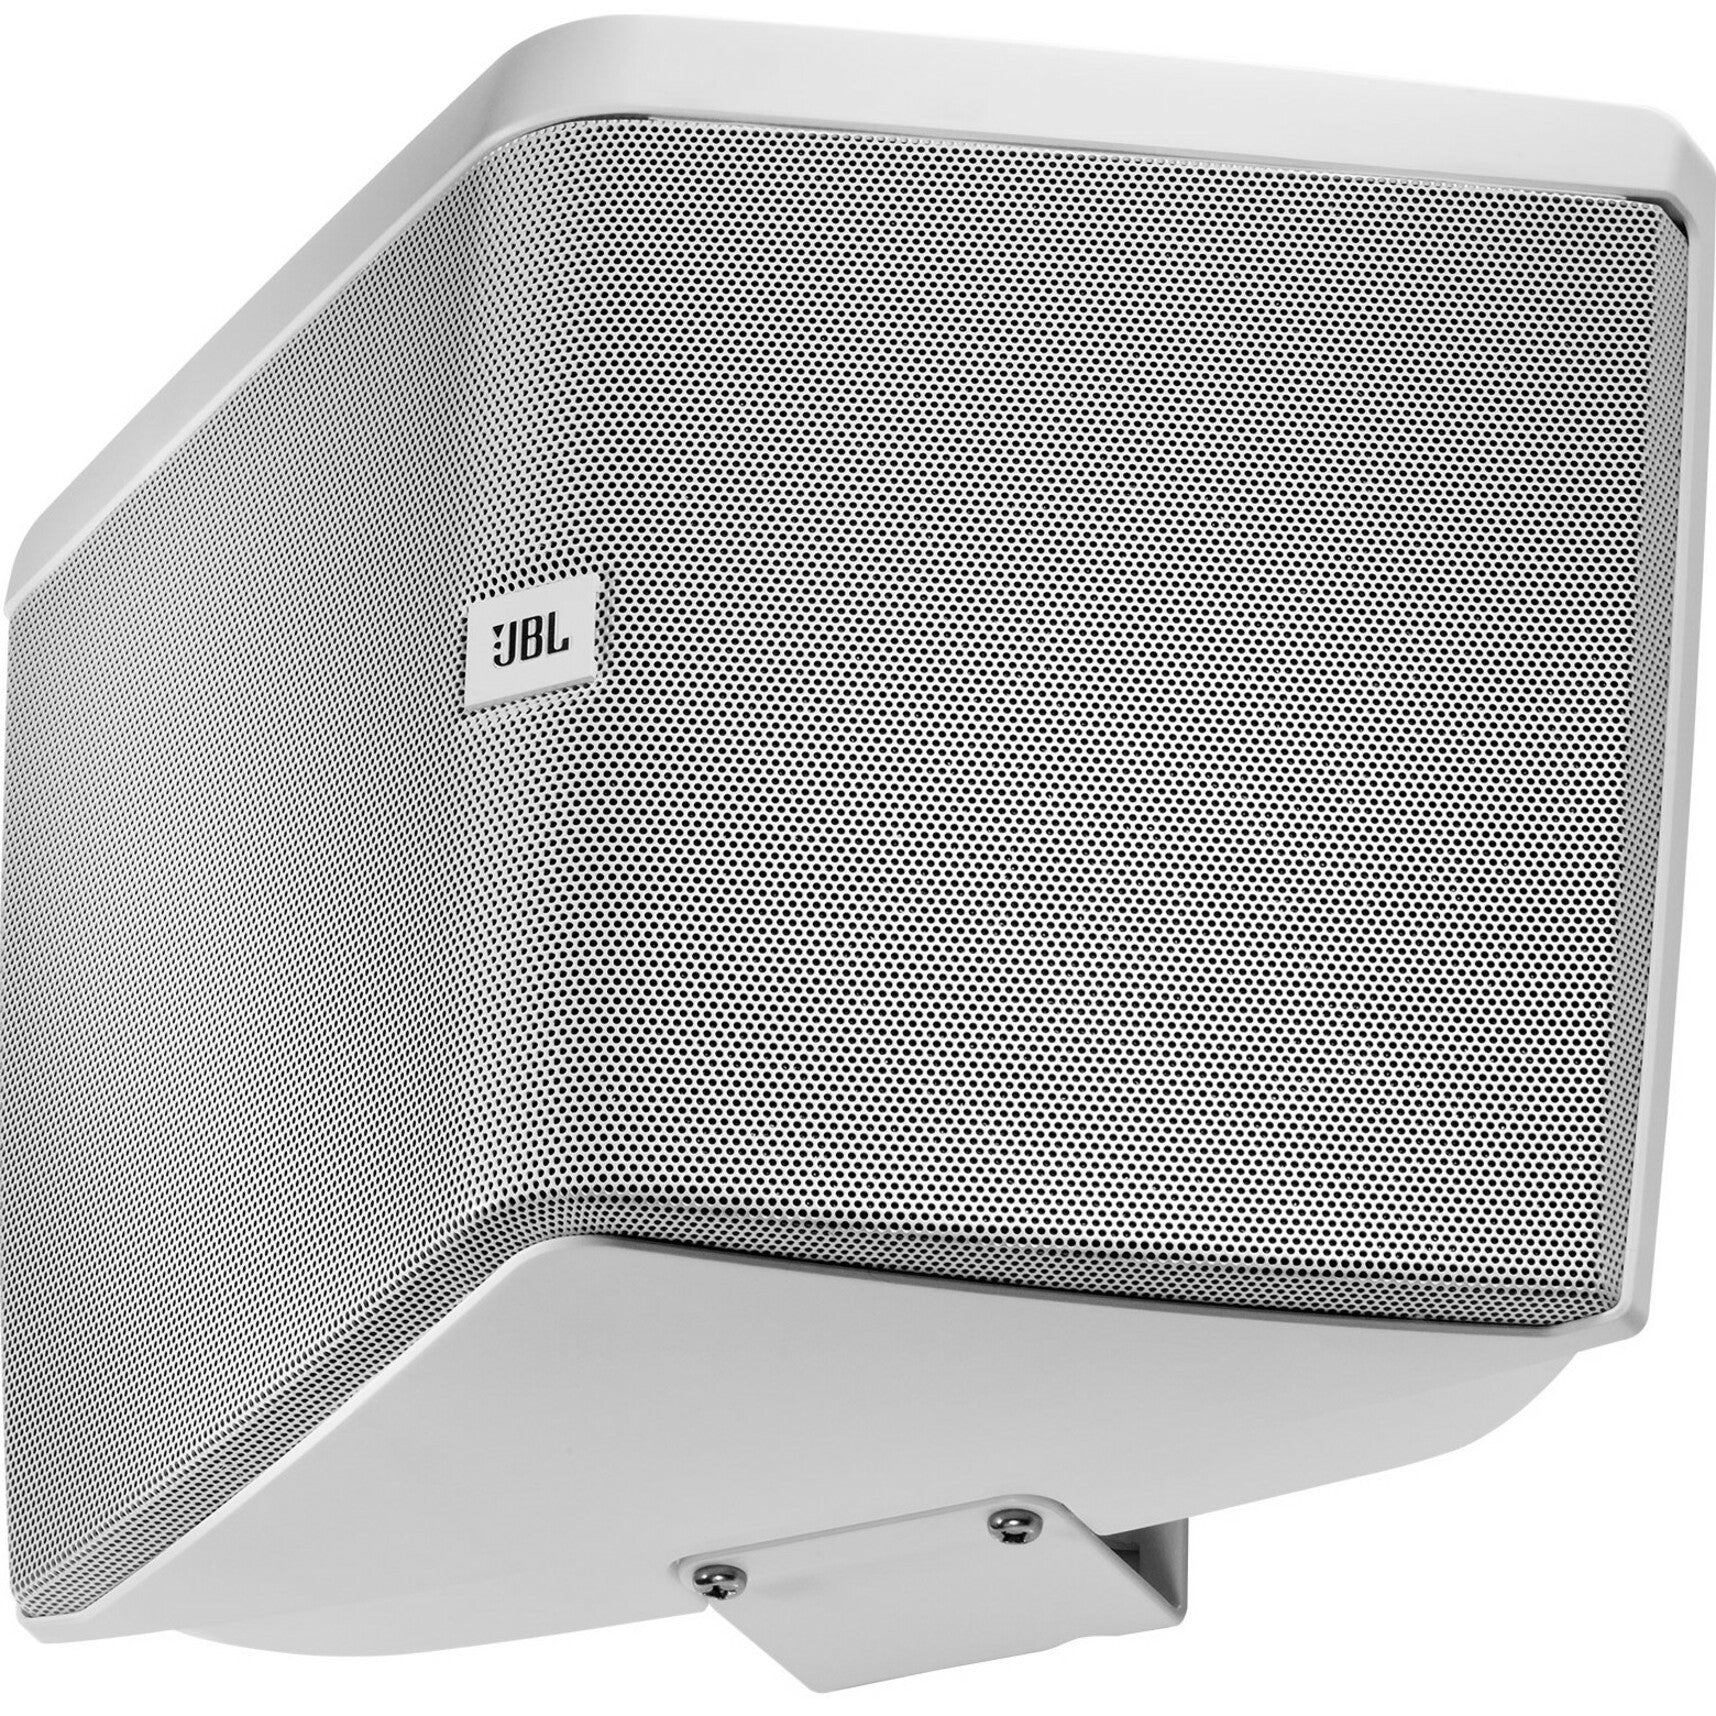 JBL CONTROL HST-WH Wide-Coverage Speaker With 5-1/4 LF, Dual Tweeters And HST Technology, 100W RMS, White